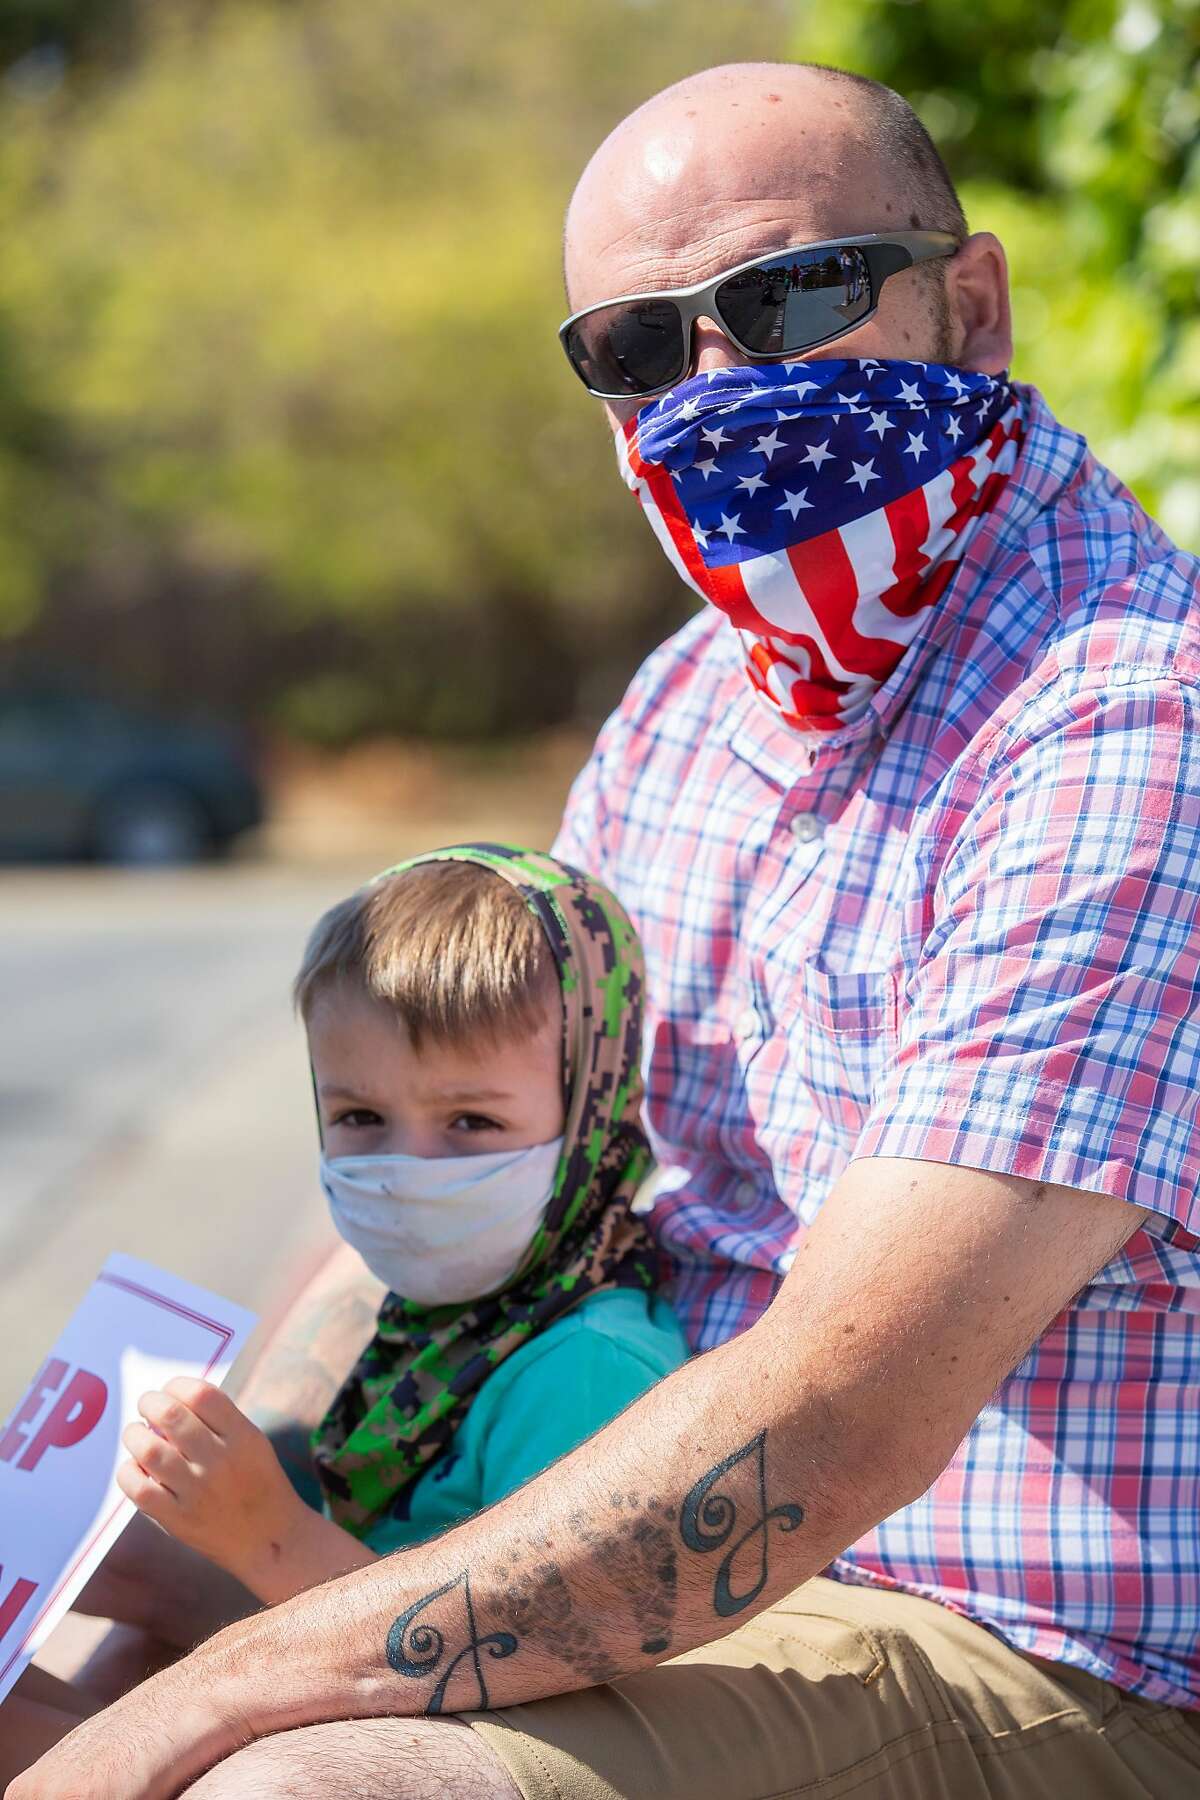 Joe Pelleriti and his son Joe Pelleriti Jr., 3, at a rally outside the Marin County Office of Education on Thursday, July 16, 2020, in San Rafael, Calif. Teachers and their supporters across California are protesting school district plans for in-person learning, amid the coronavirus pandemic. Pelleriti�s spouse Tricia Pelleriti was laid off from her third grade teaching job.